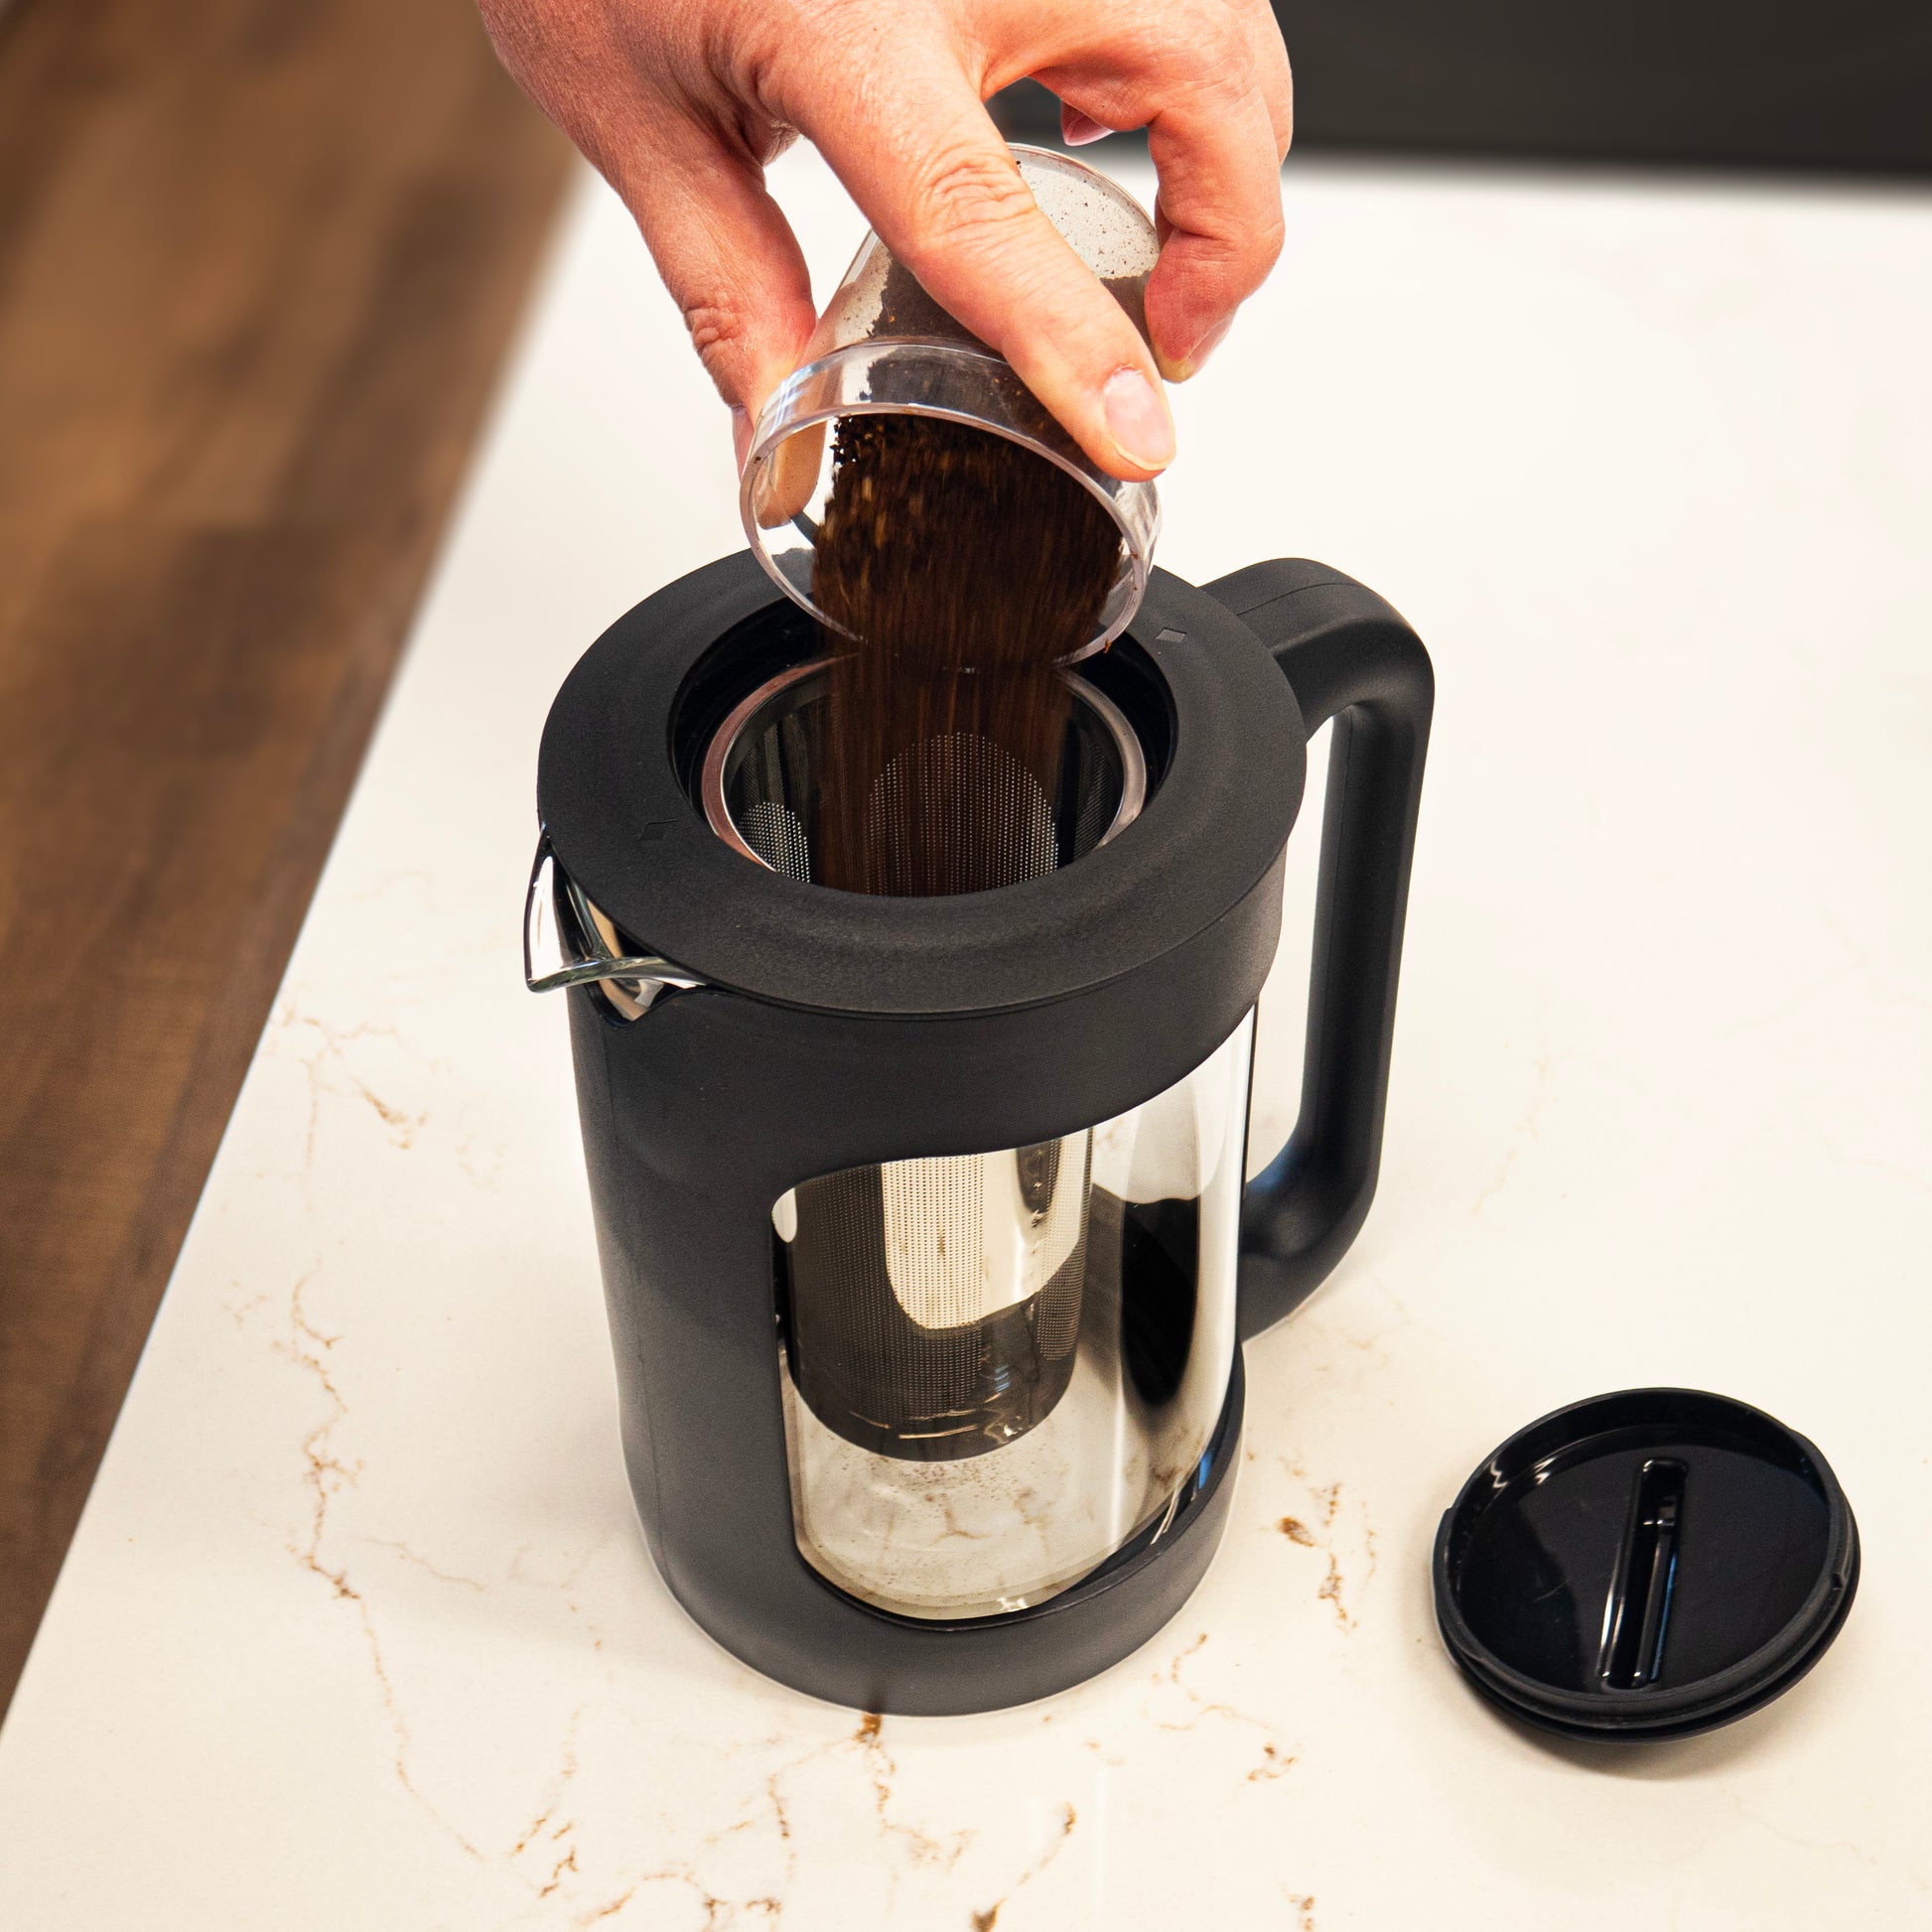 Making Cold Brew Coffee With the Primula Coffee Maker - I Need Coffee